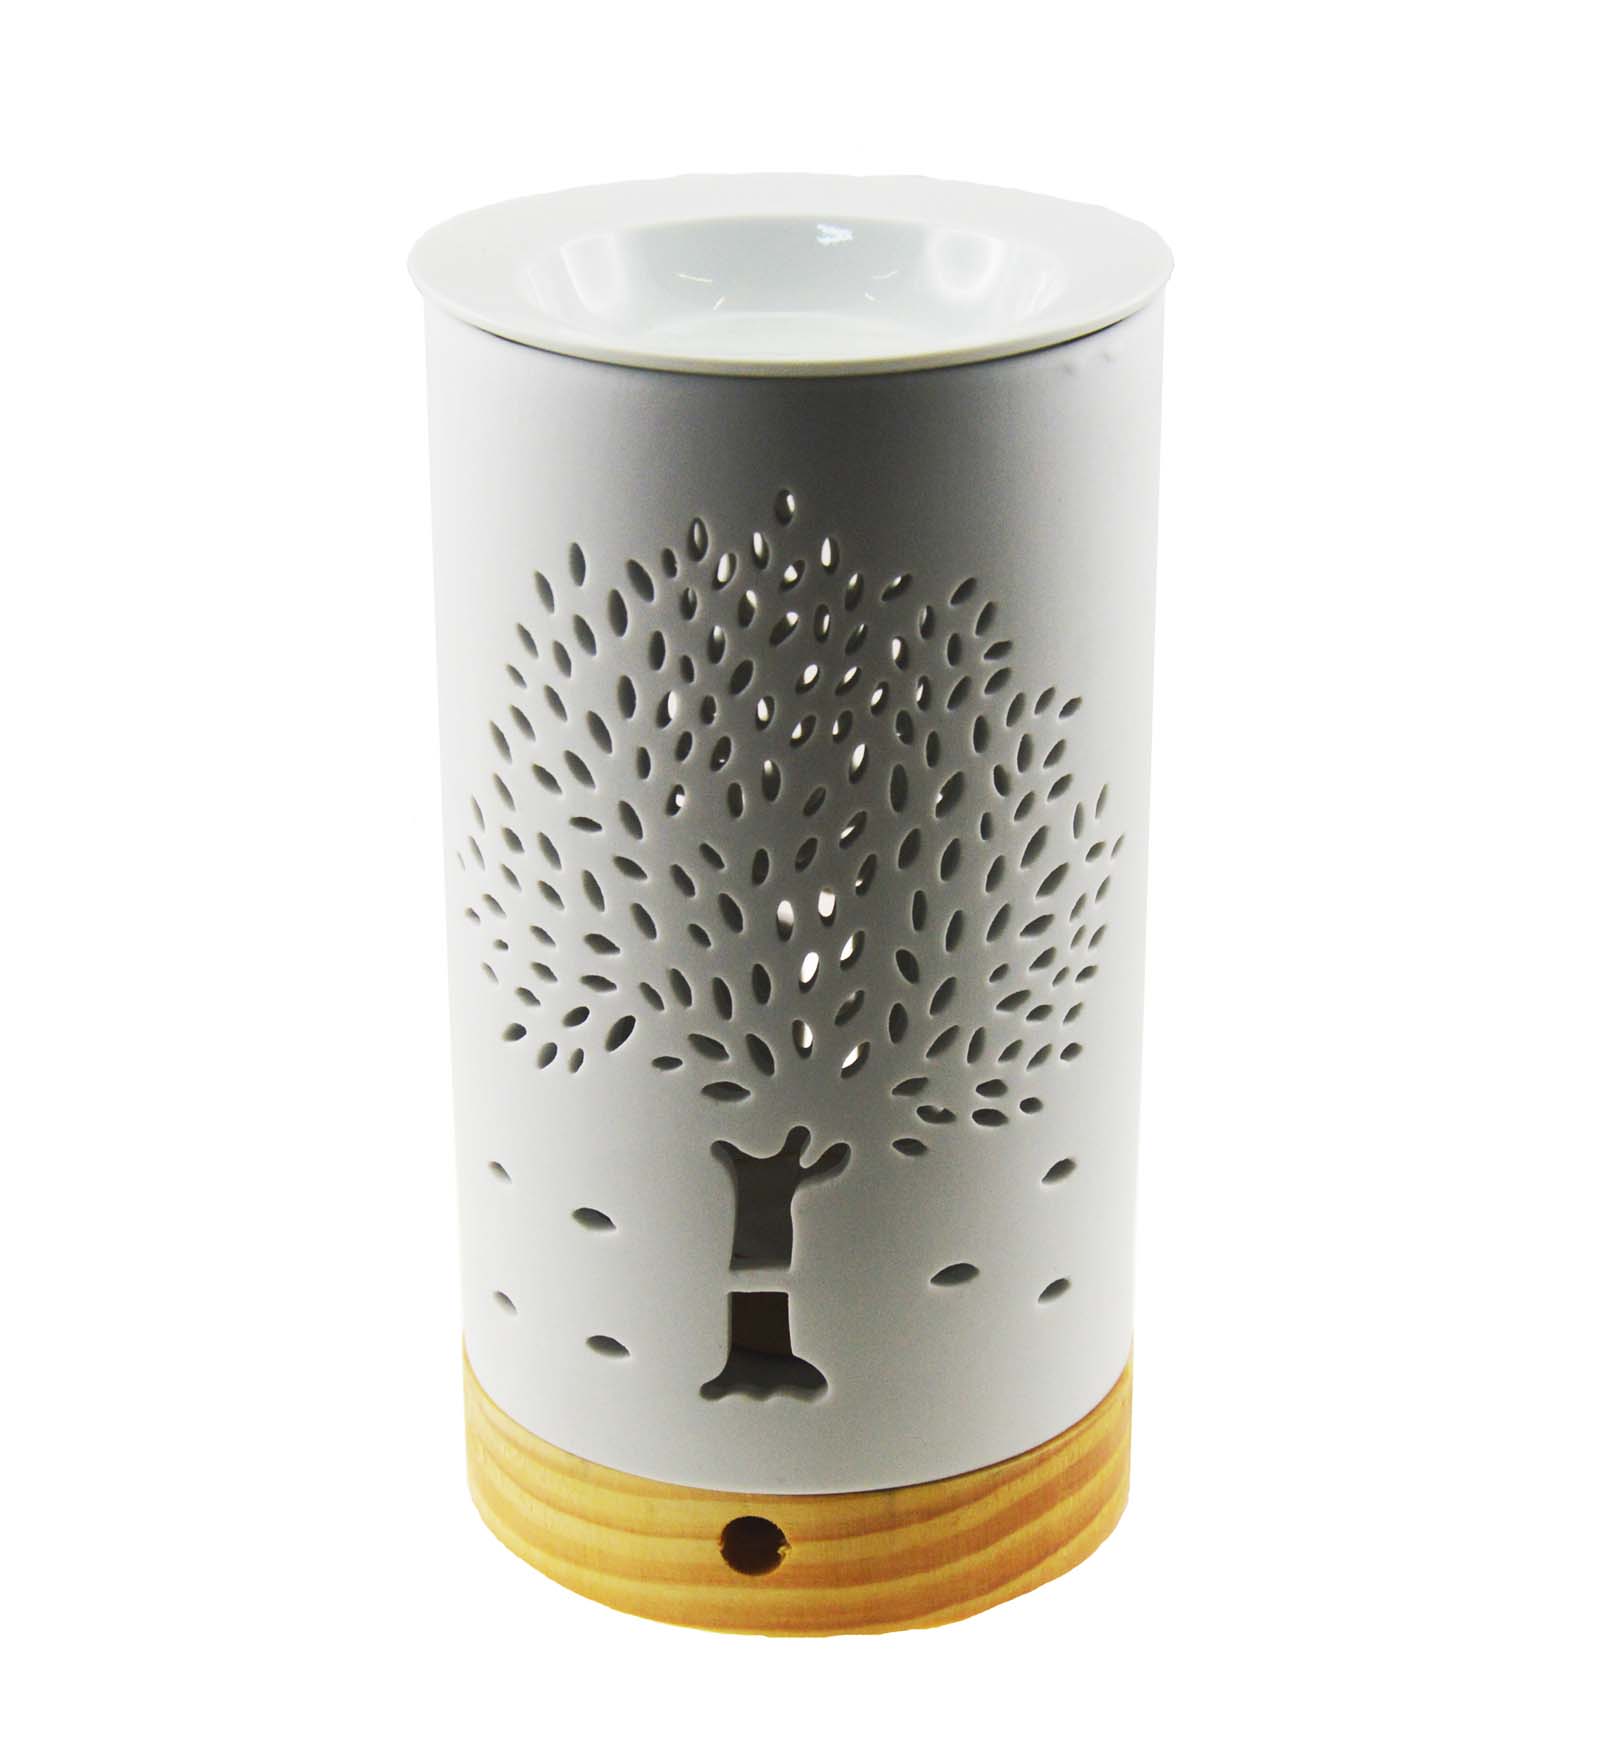 Song of India Cylindrical Electric Bulb Burner (White)